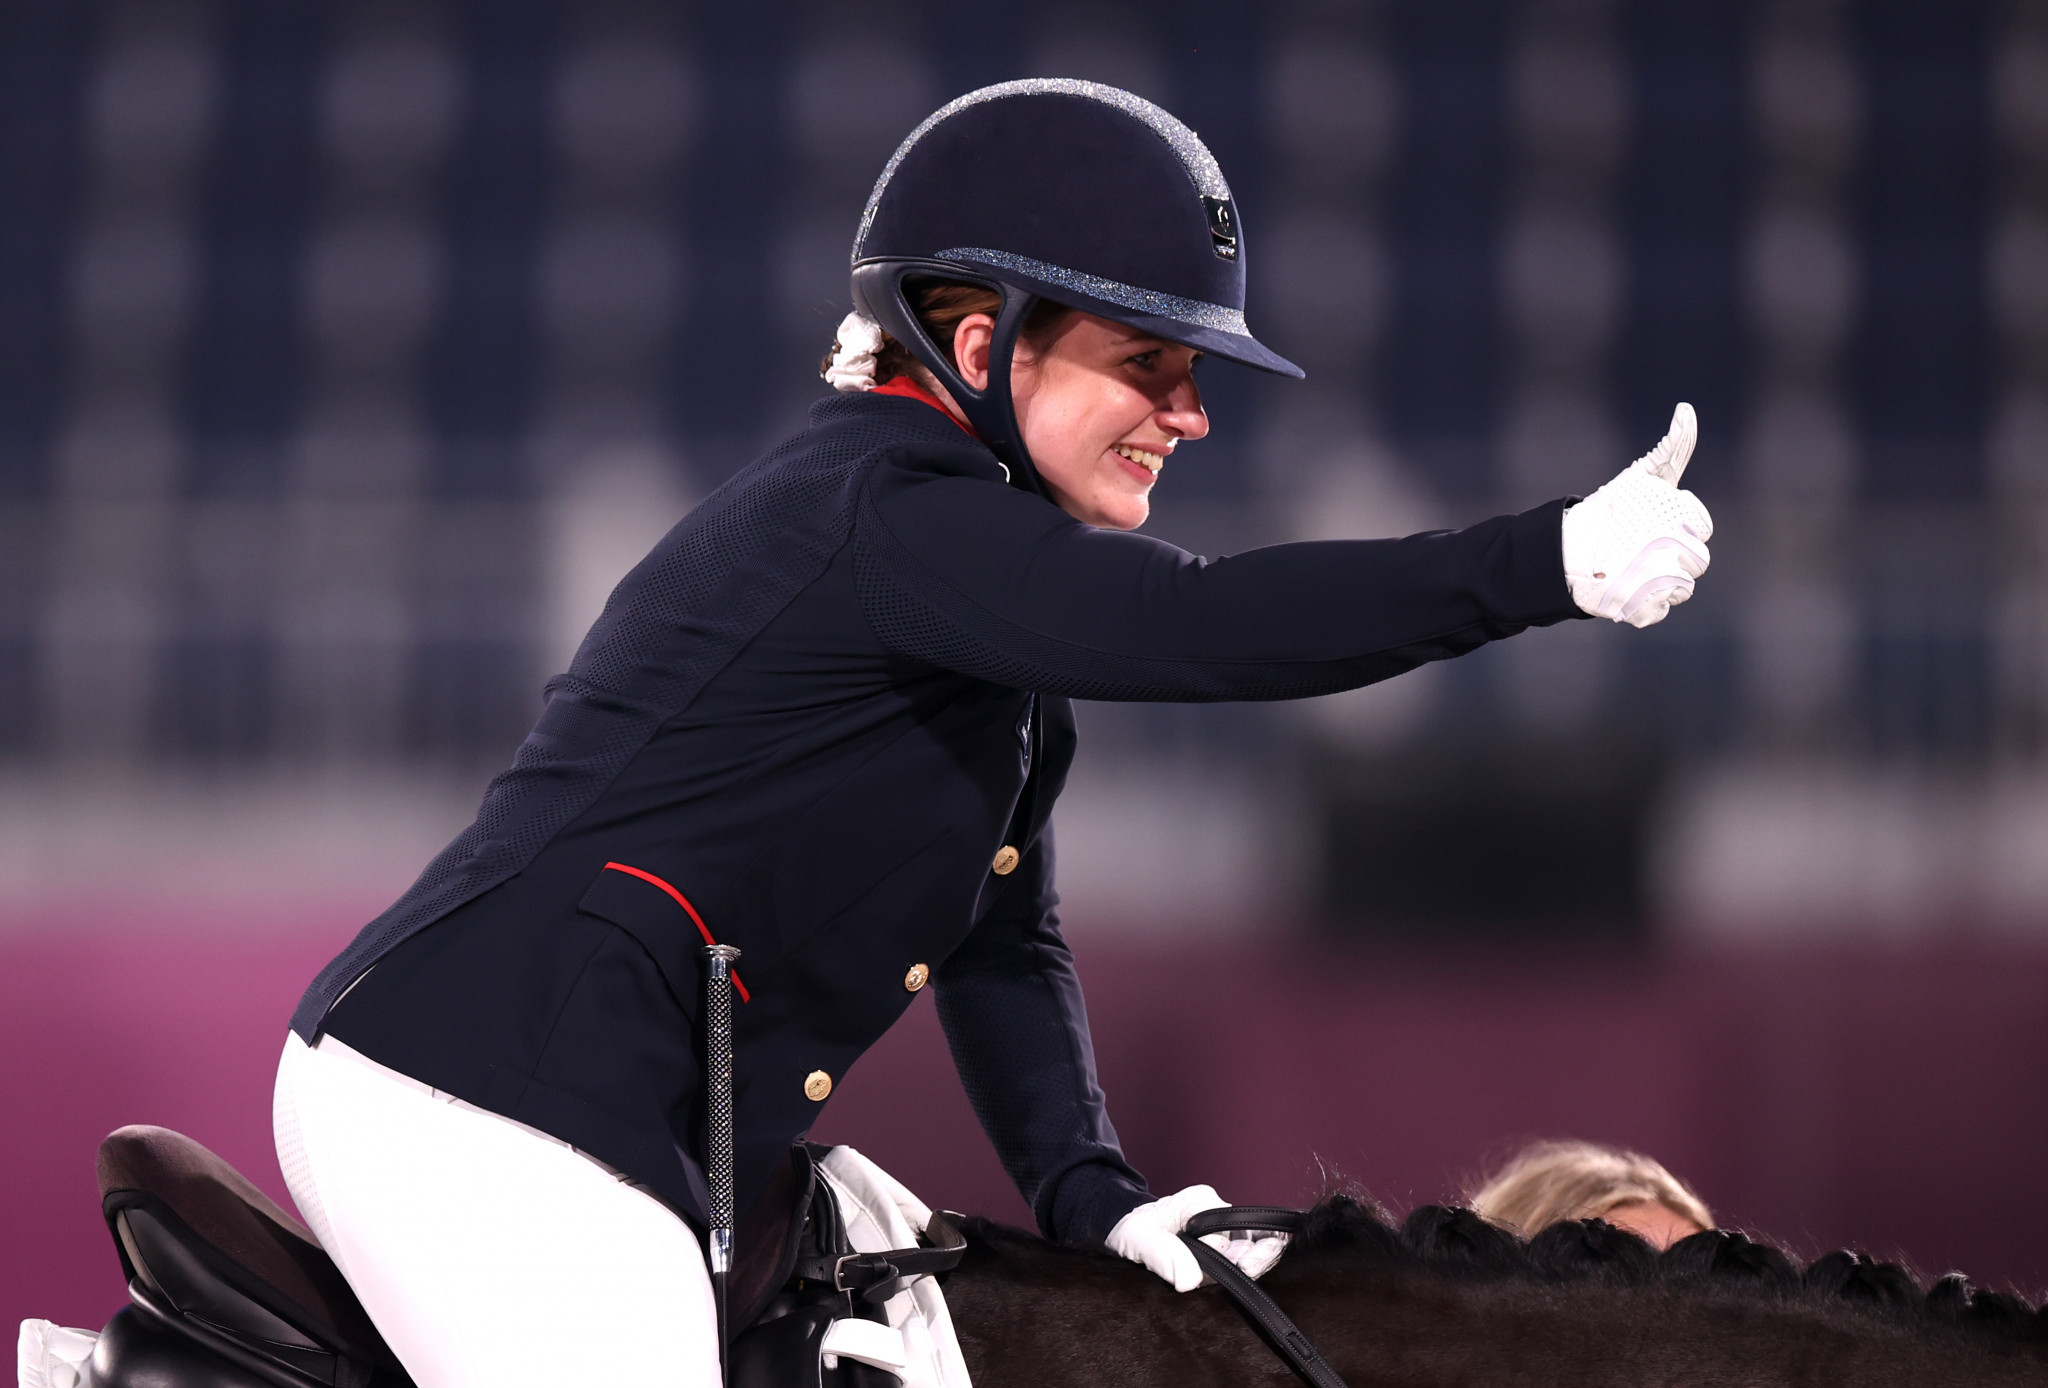 Equestrian ace Baker returned to winning ways following the birth of her baby. GETTY IMAGES